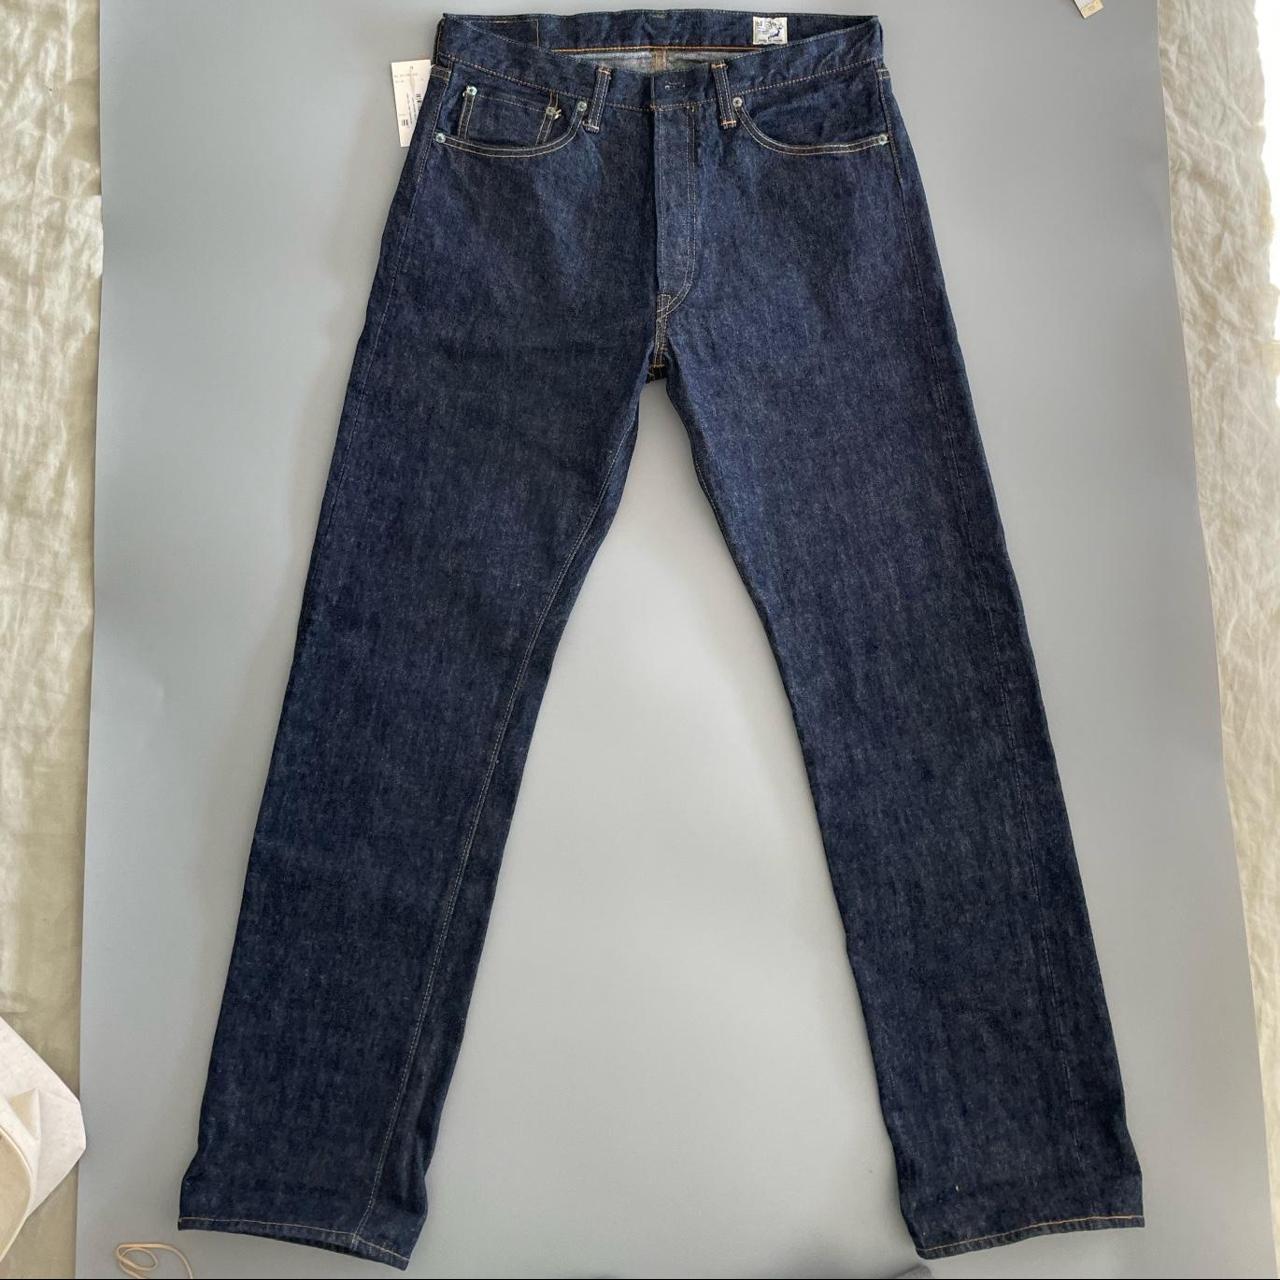 Orslow 105 one wash jeans Straight fit Selvedge... - Depop